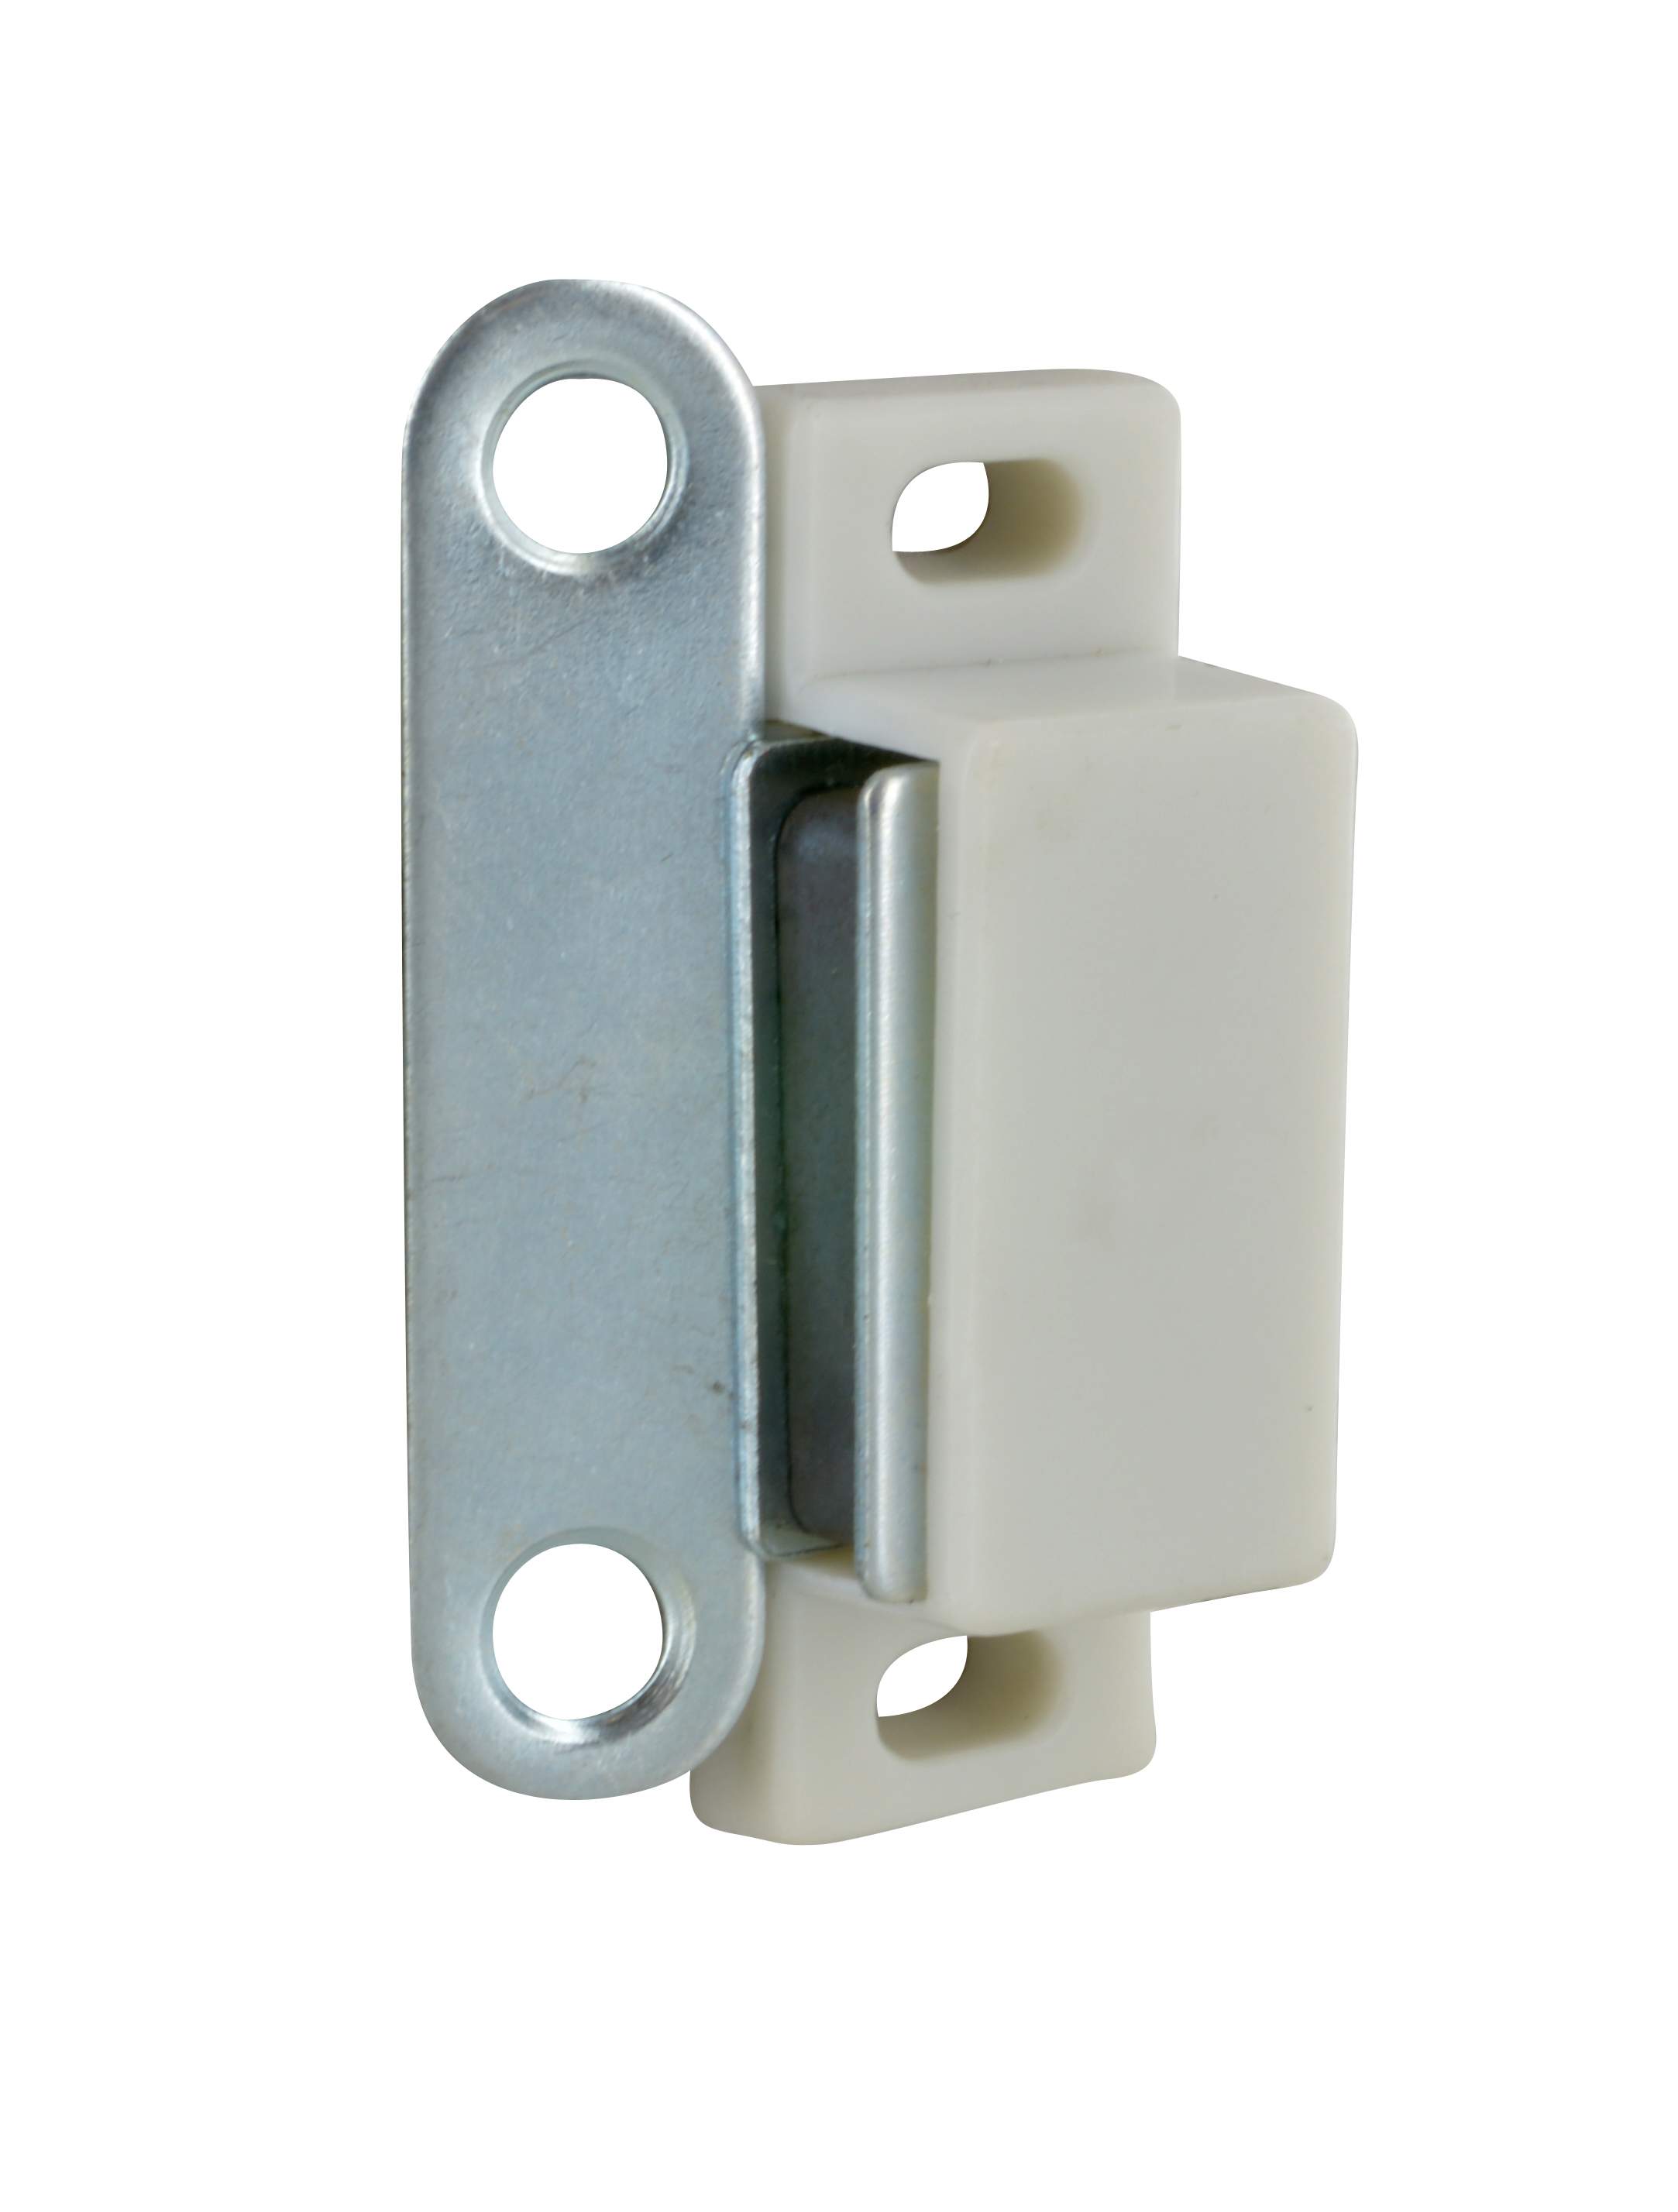 Magnetic latch white 4kg, 46x16x15 mm, 2 pieces